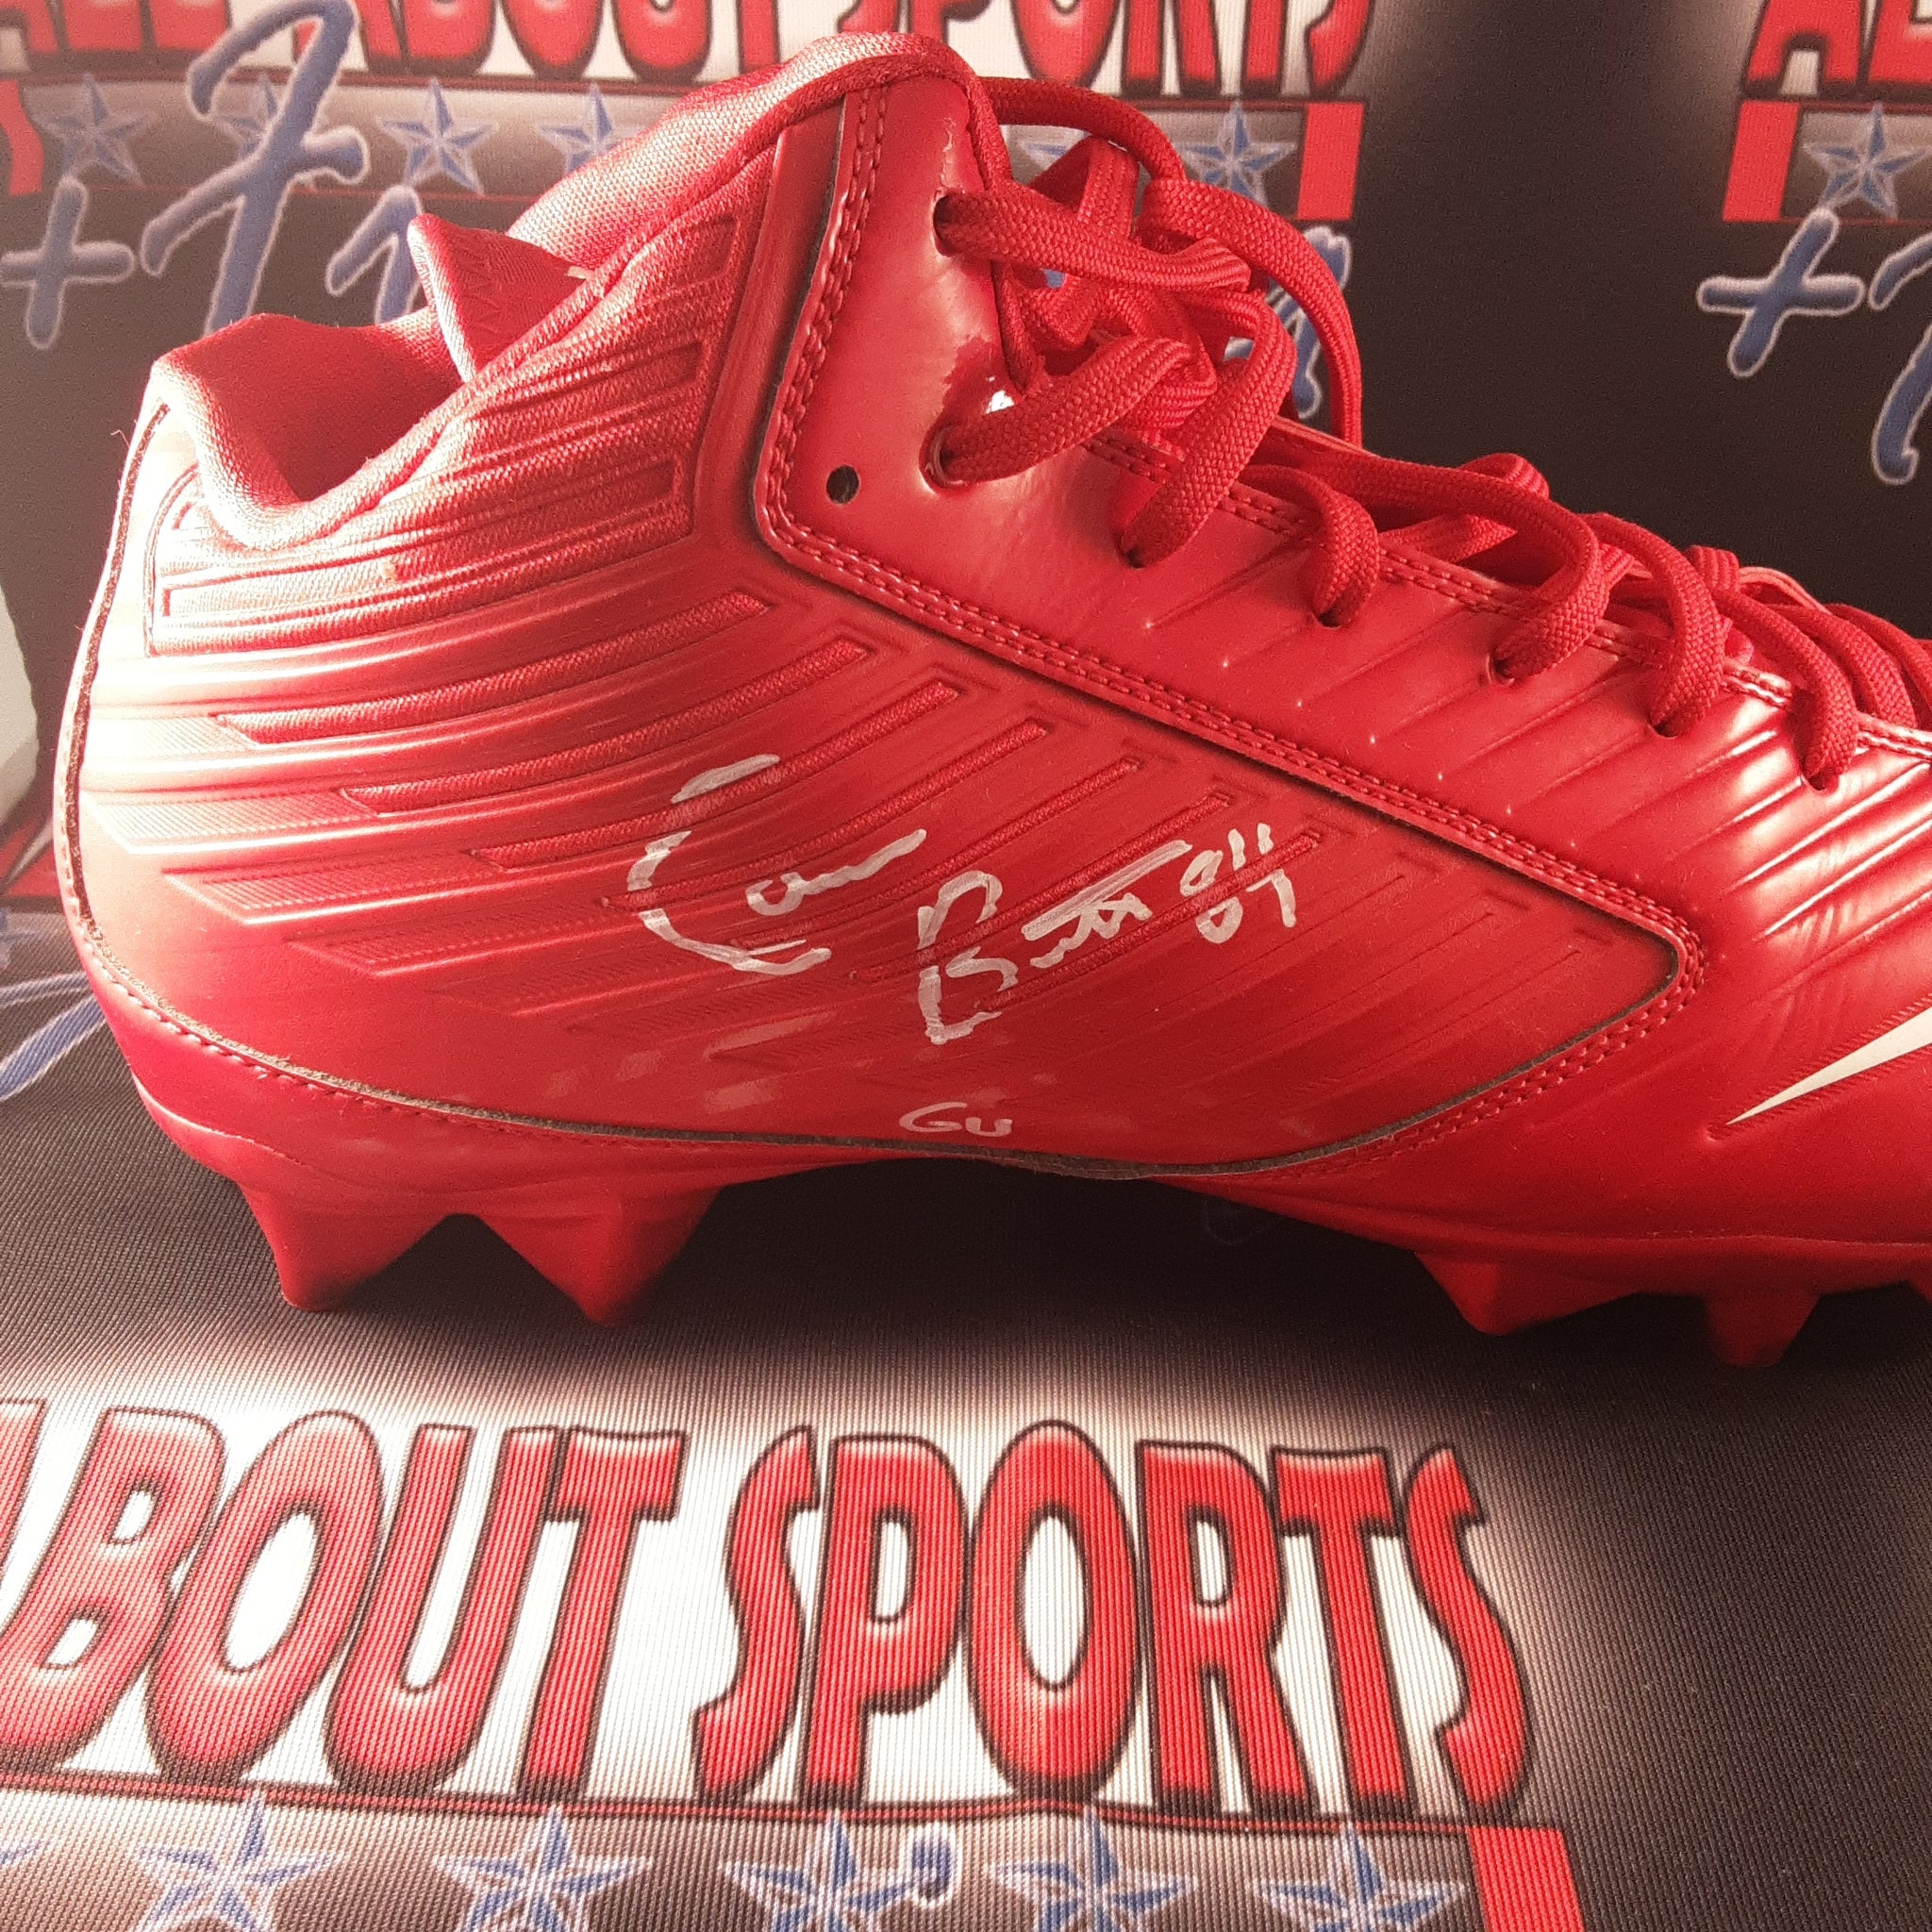 Cameron Brate Authentic Game Used Signed Right Cleat Autographed JSA